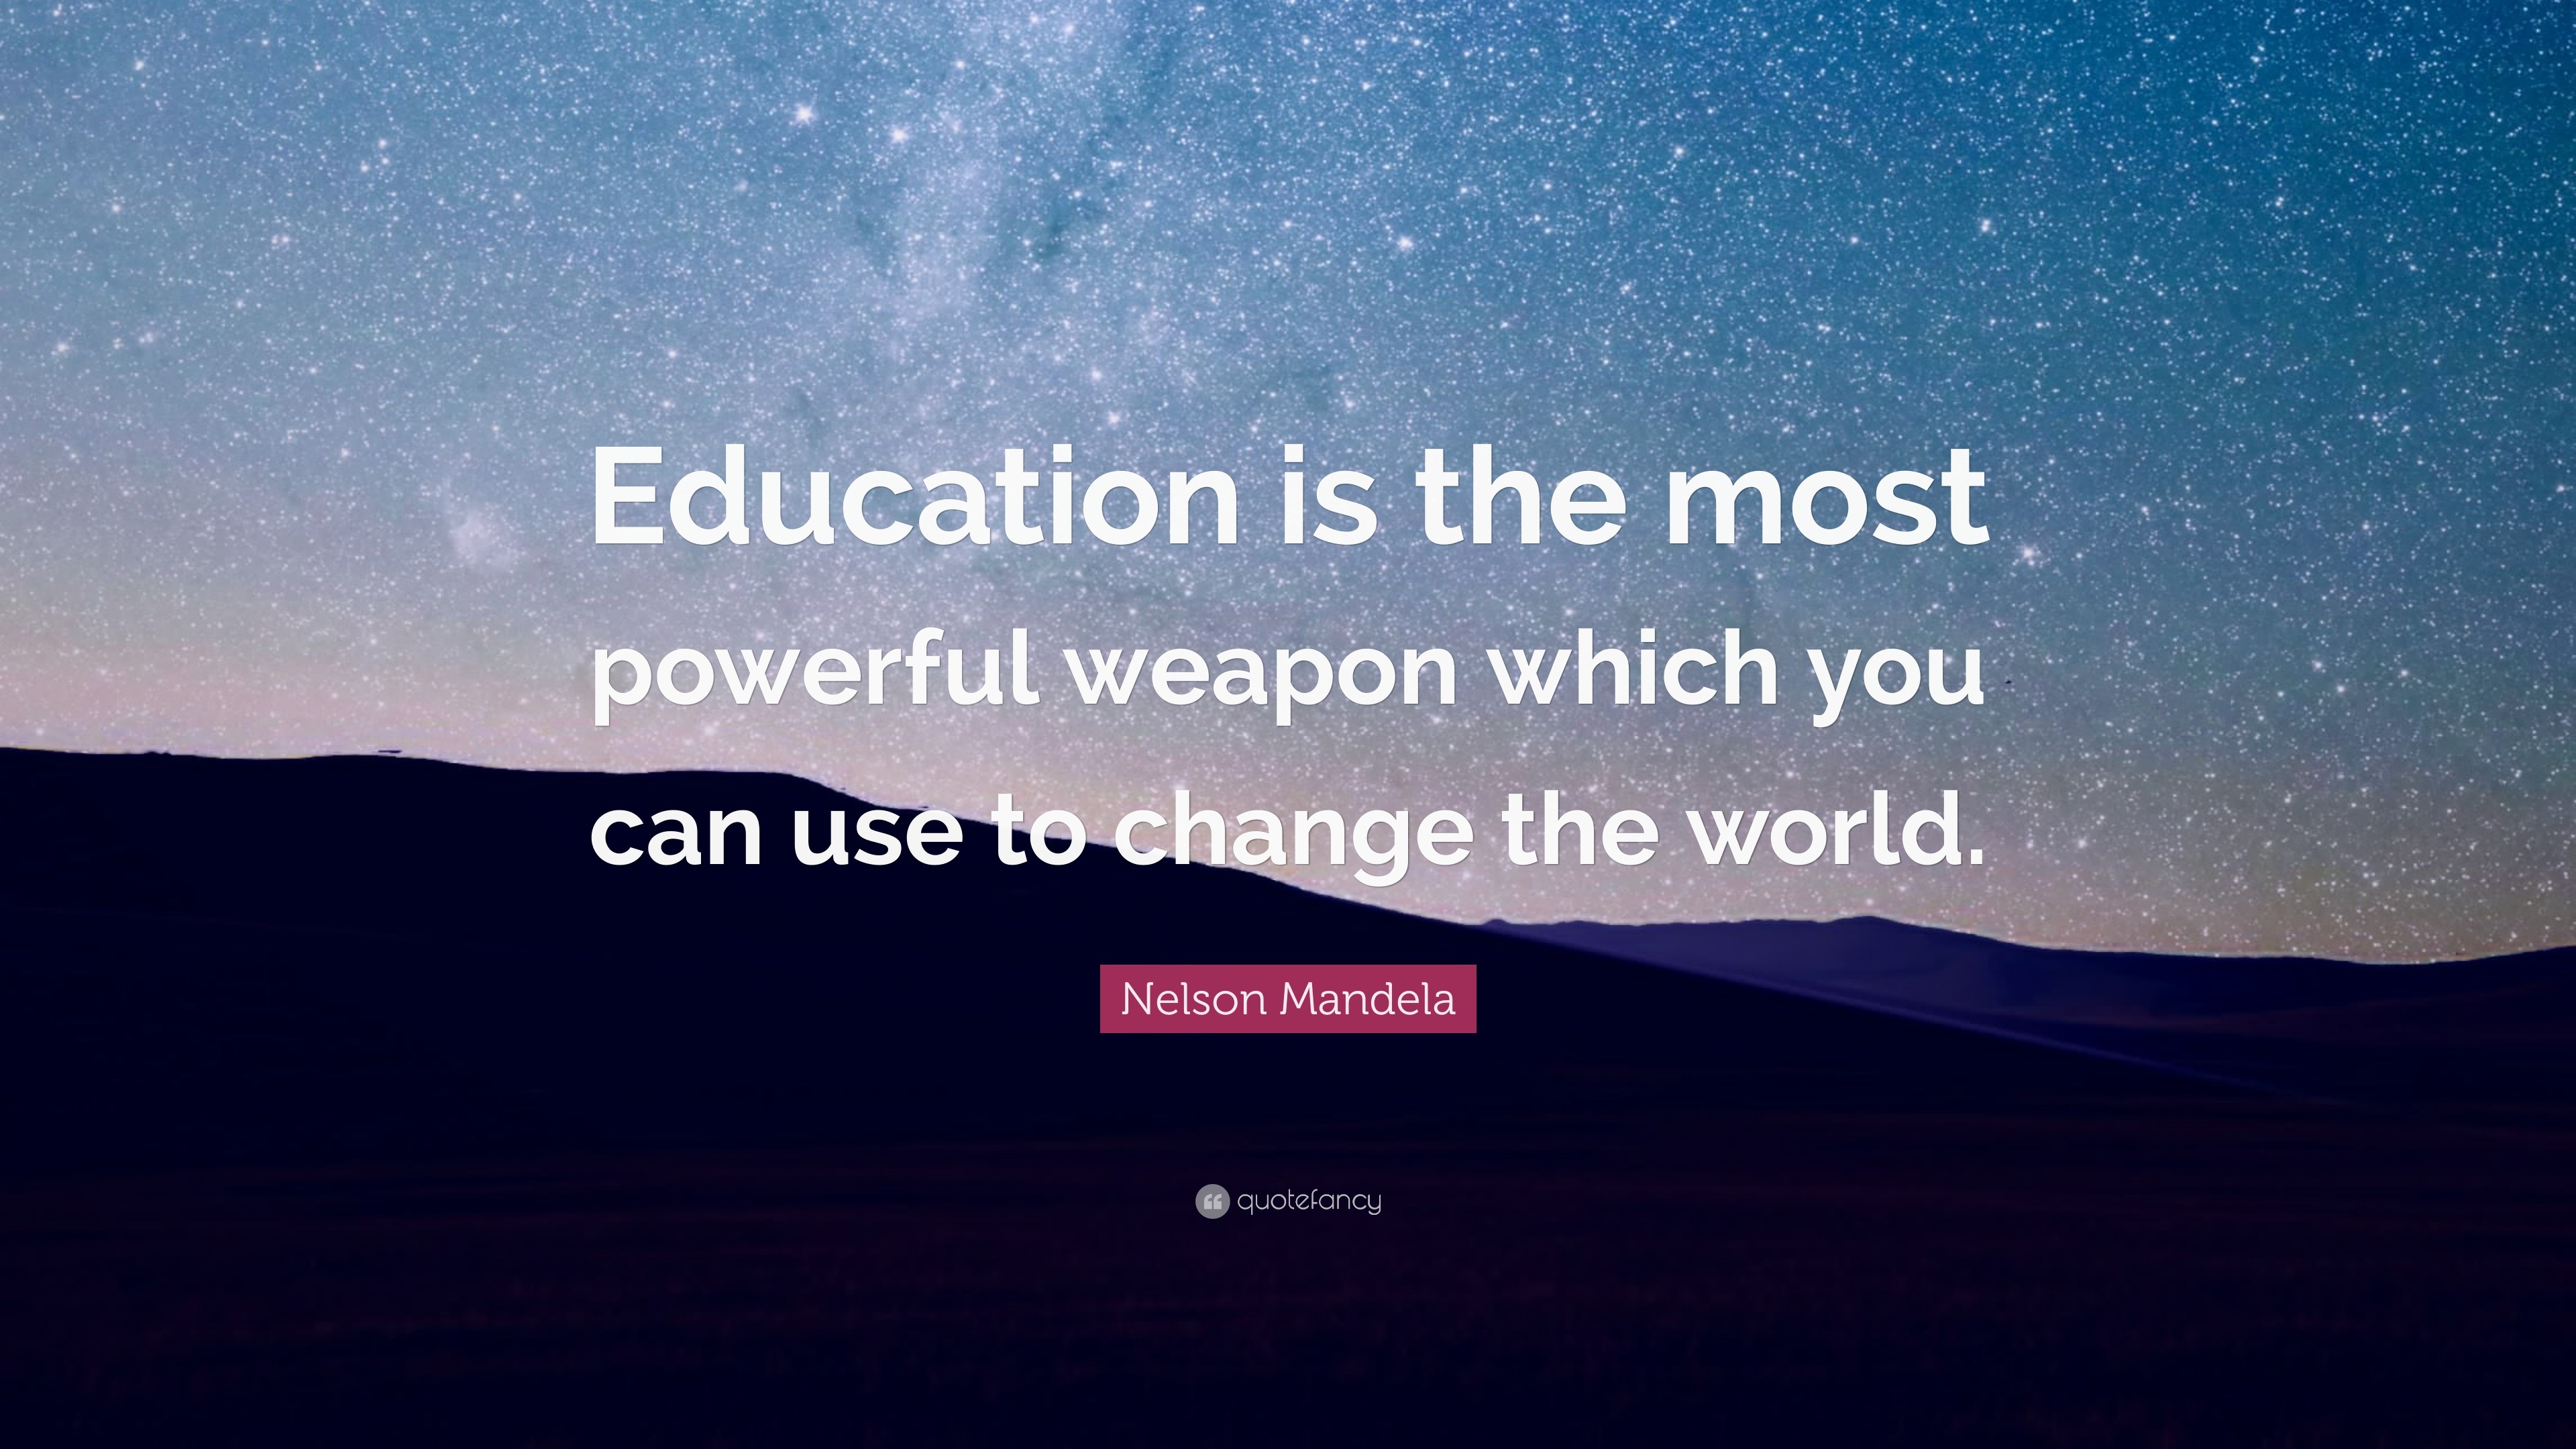 Nelson Mandela Quote: “Education is the most powerful weapon which you